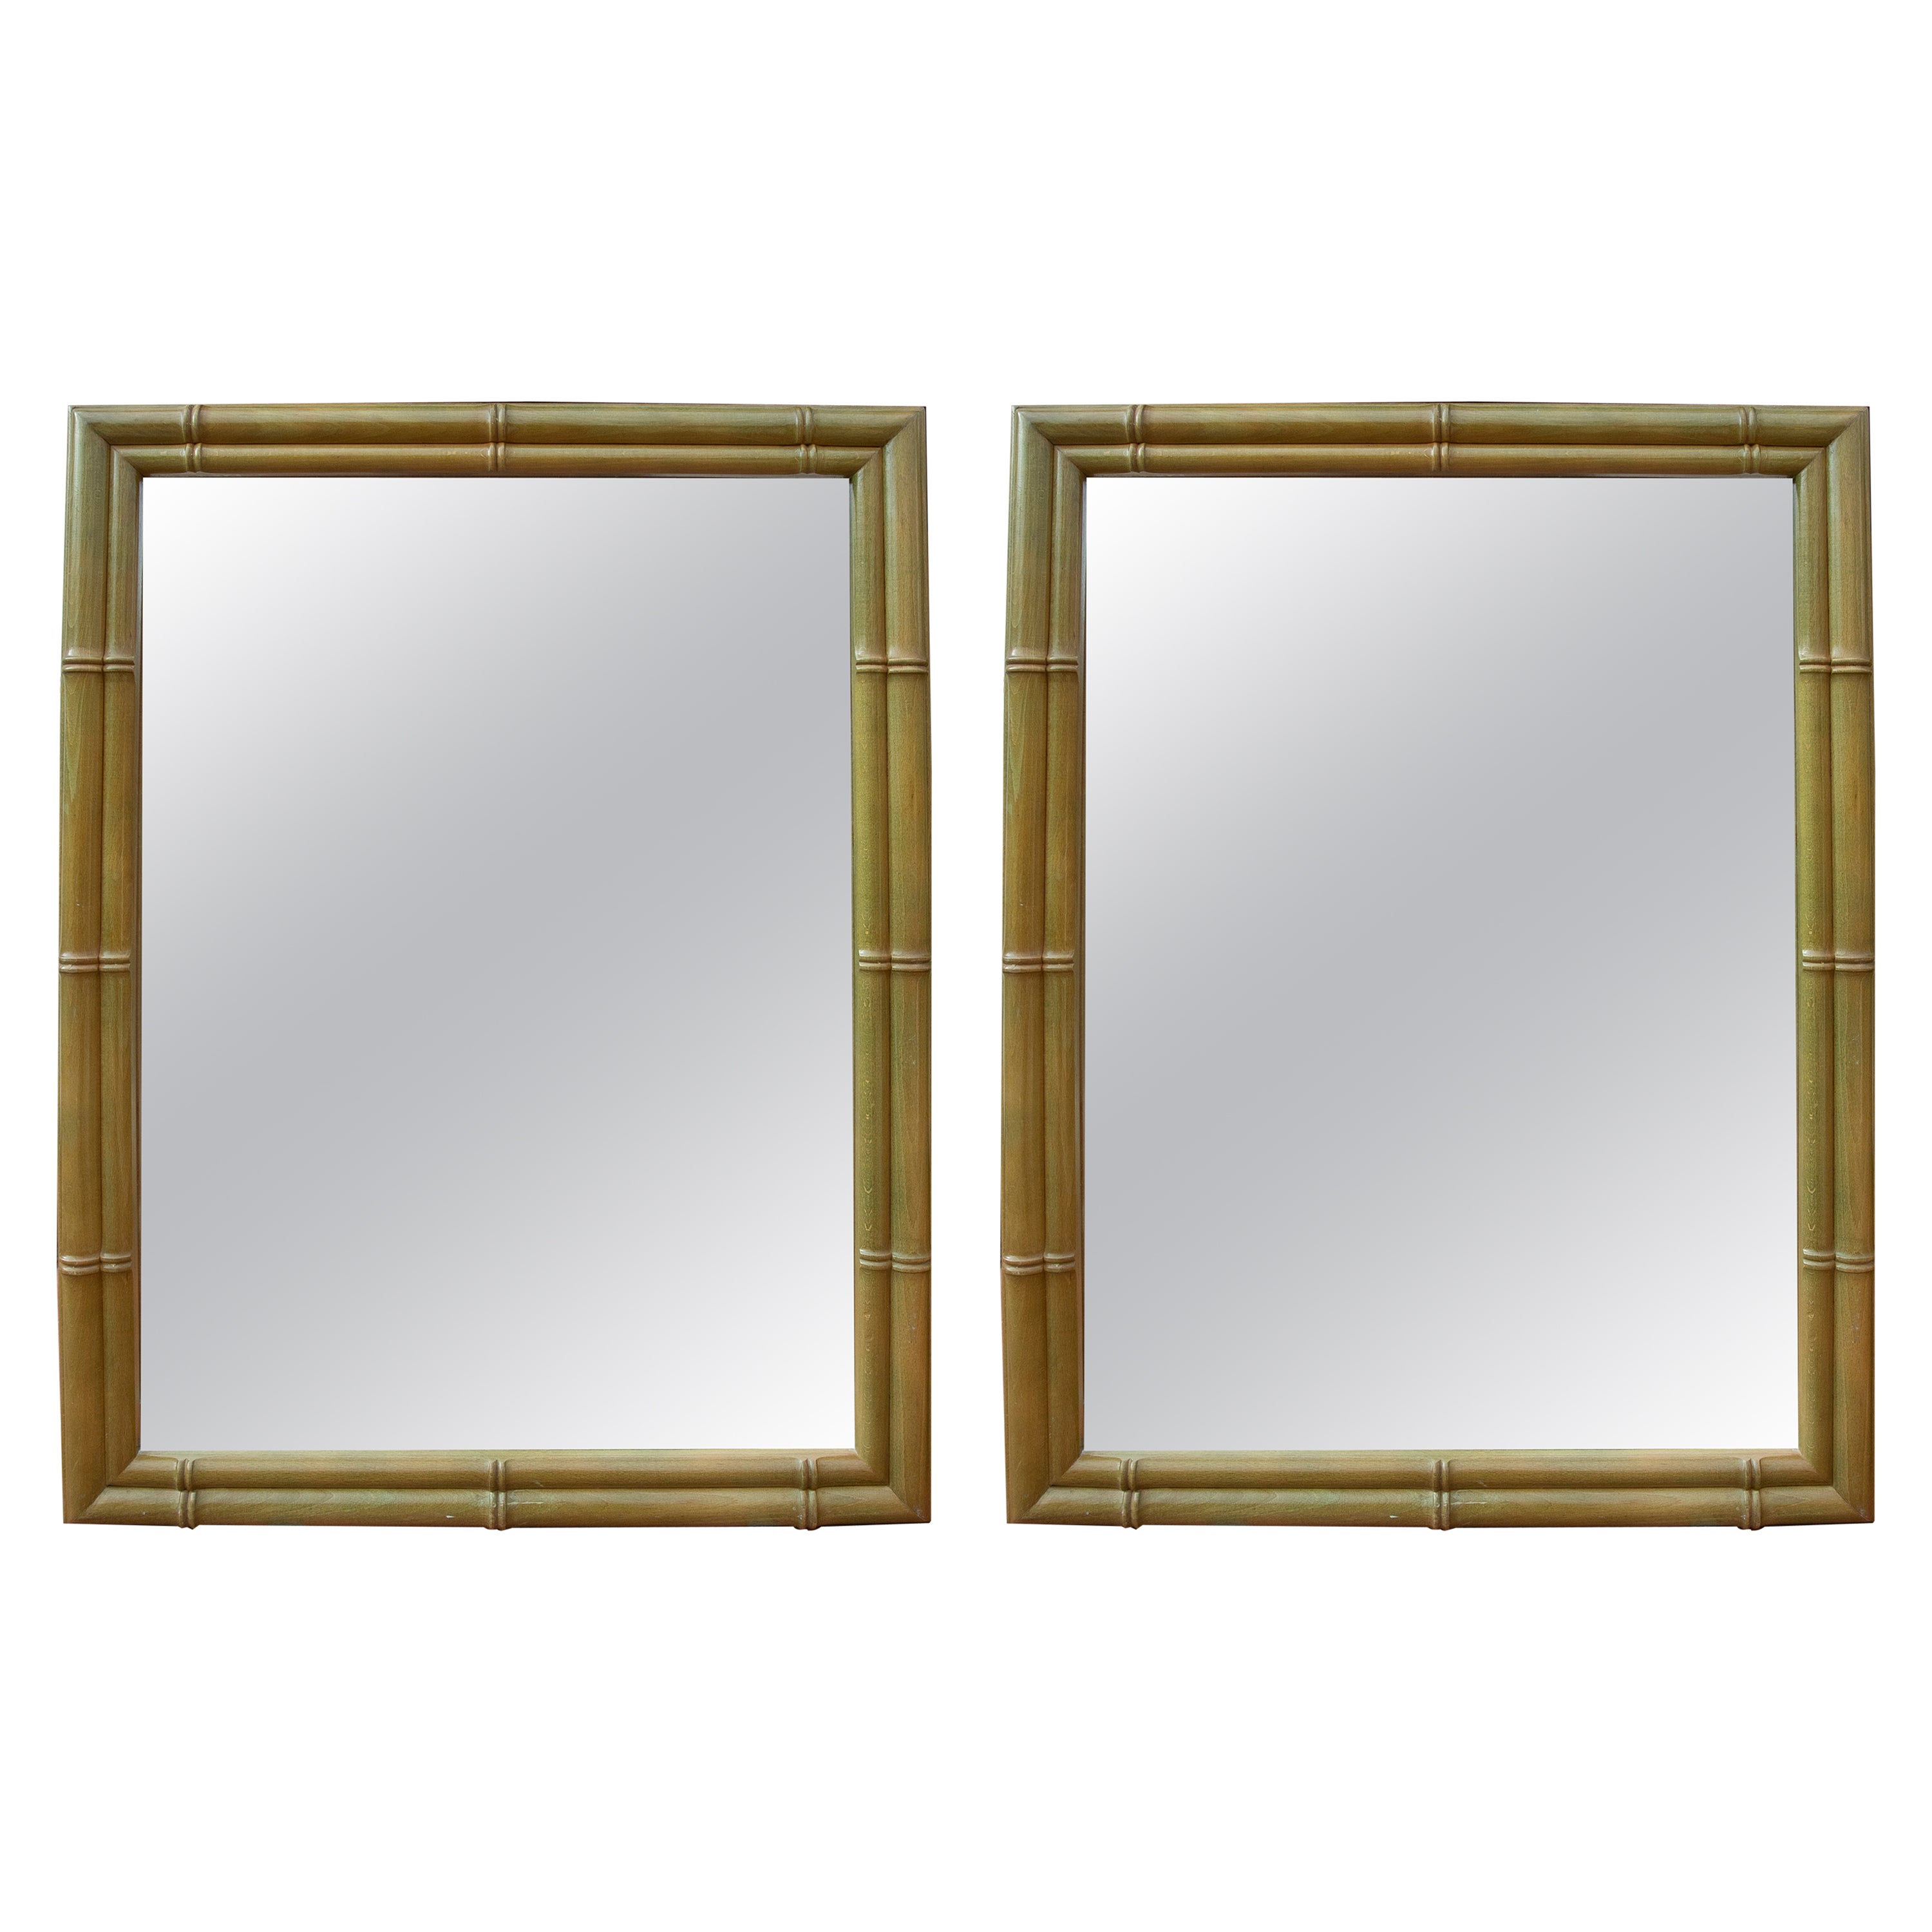 1980s Pair of Wooden Wall Mirrors in Green Colour Imitating Bamboo